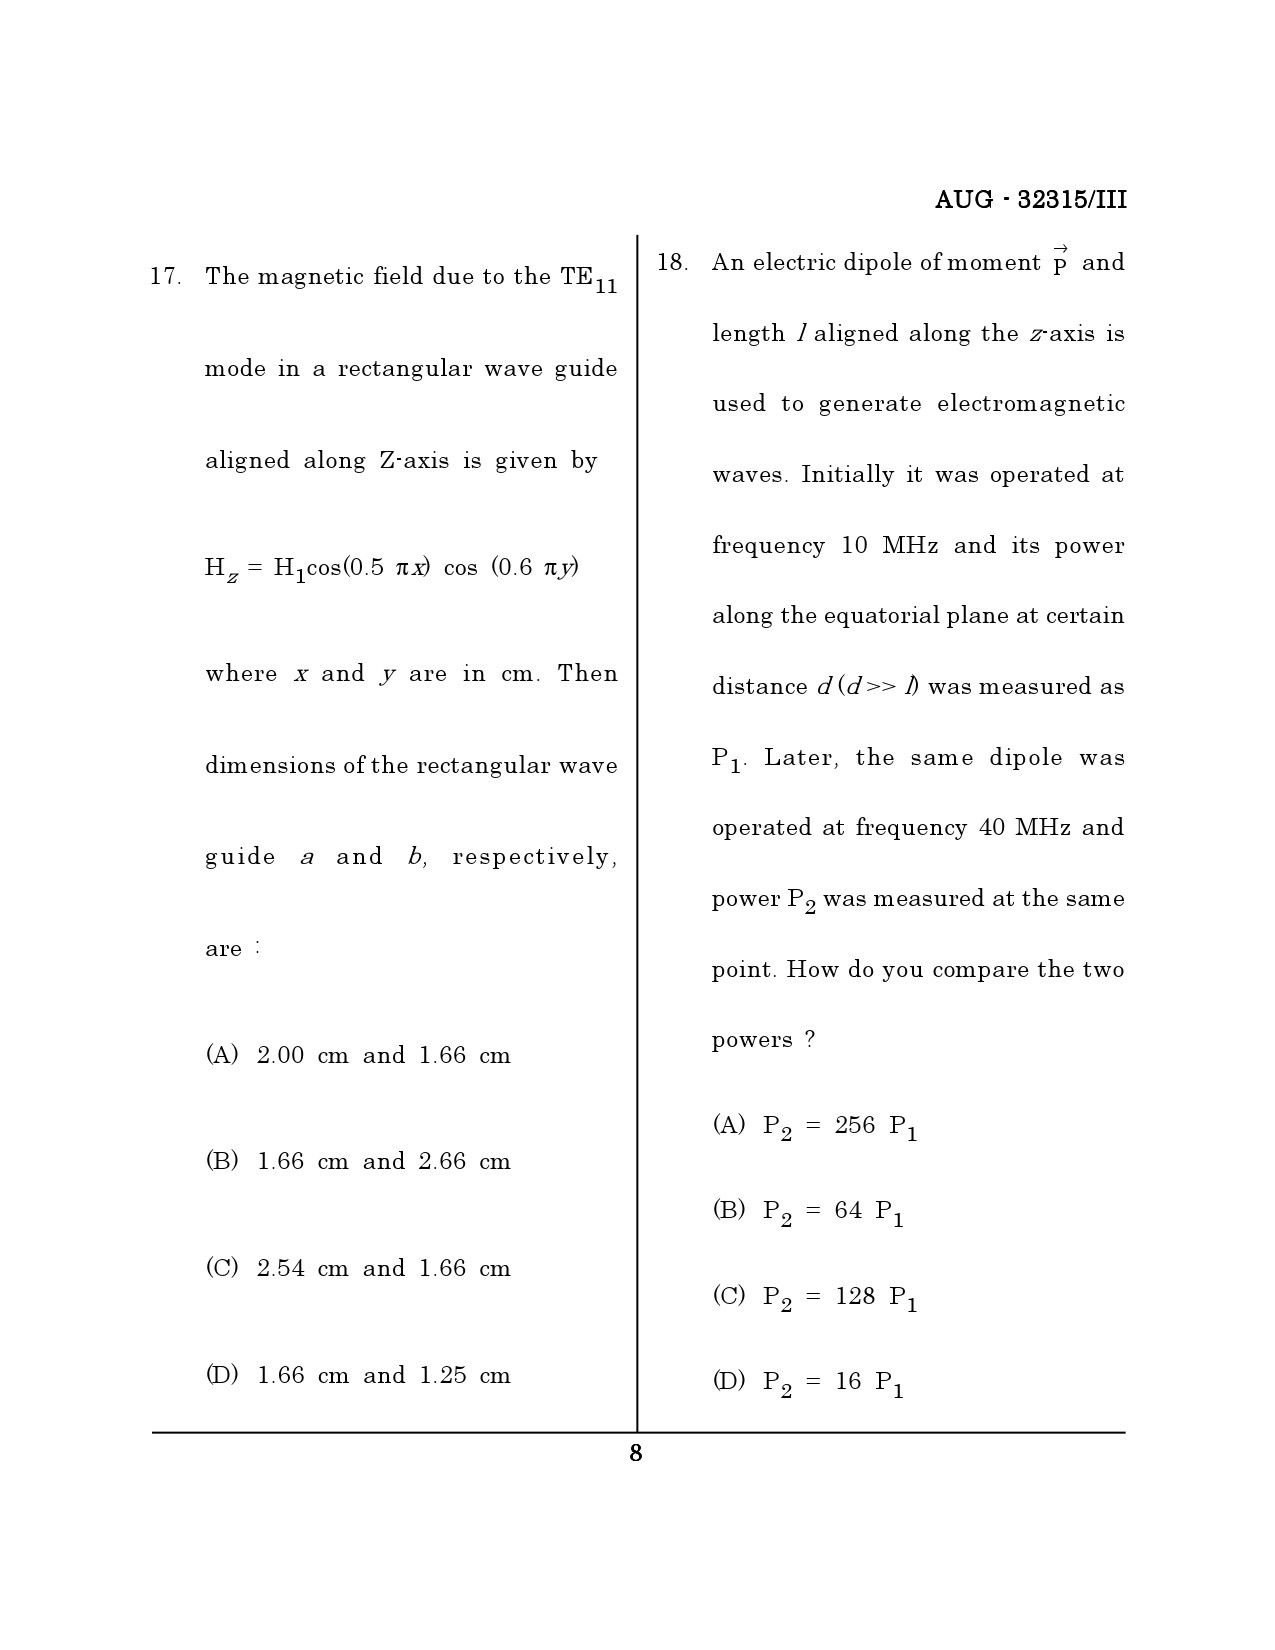 Maharashtra SET Physical Science Question Paper III August 2015 7